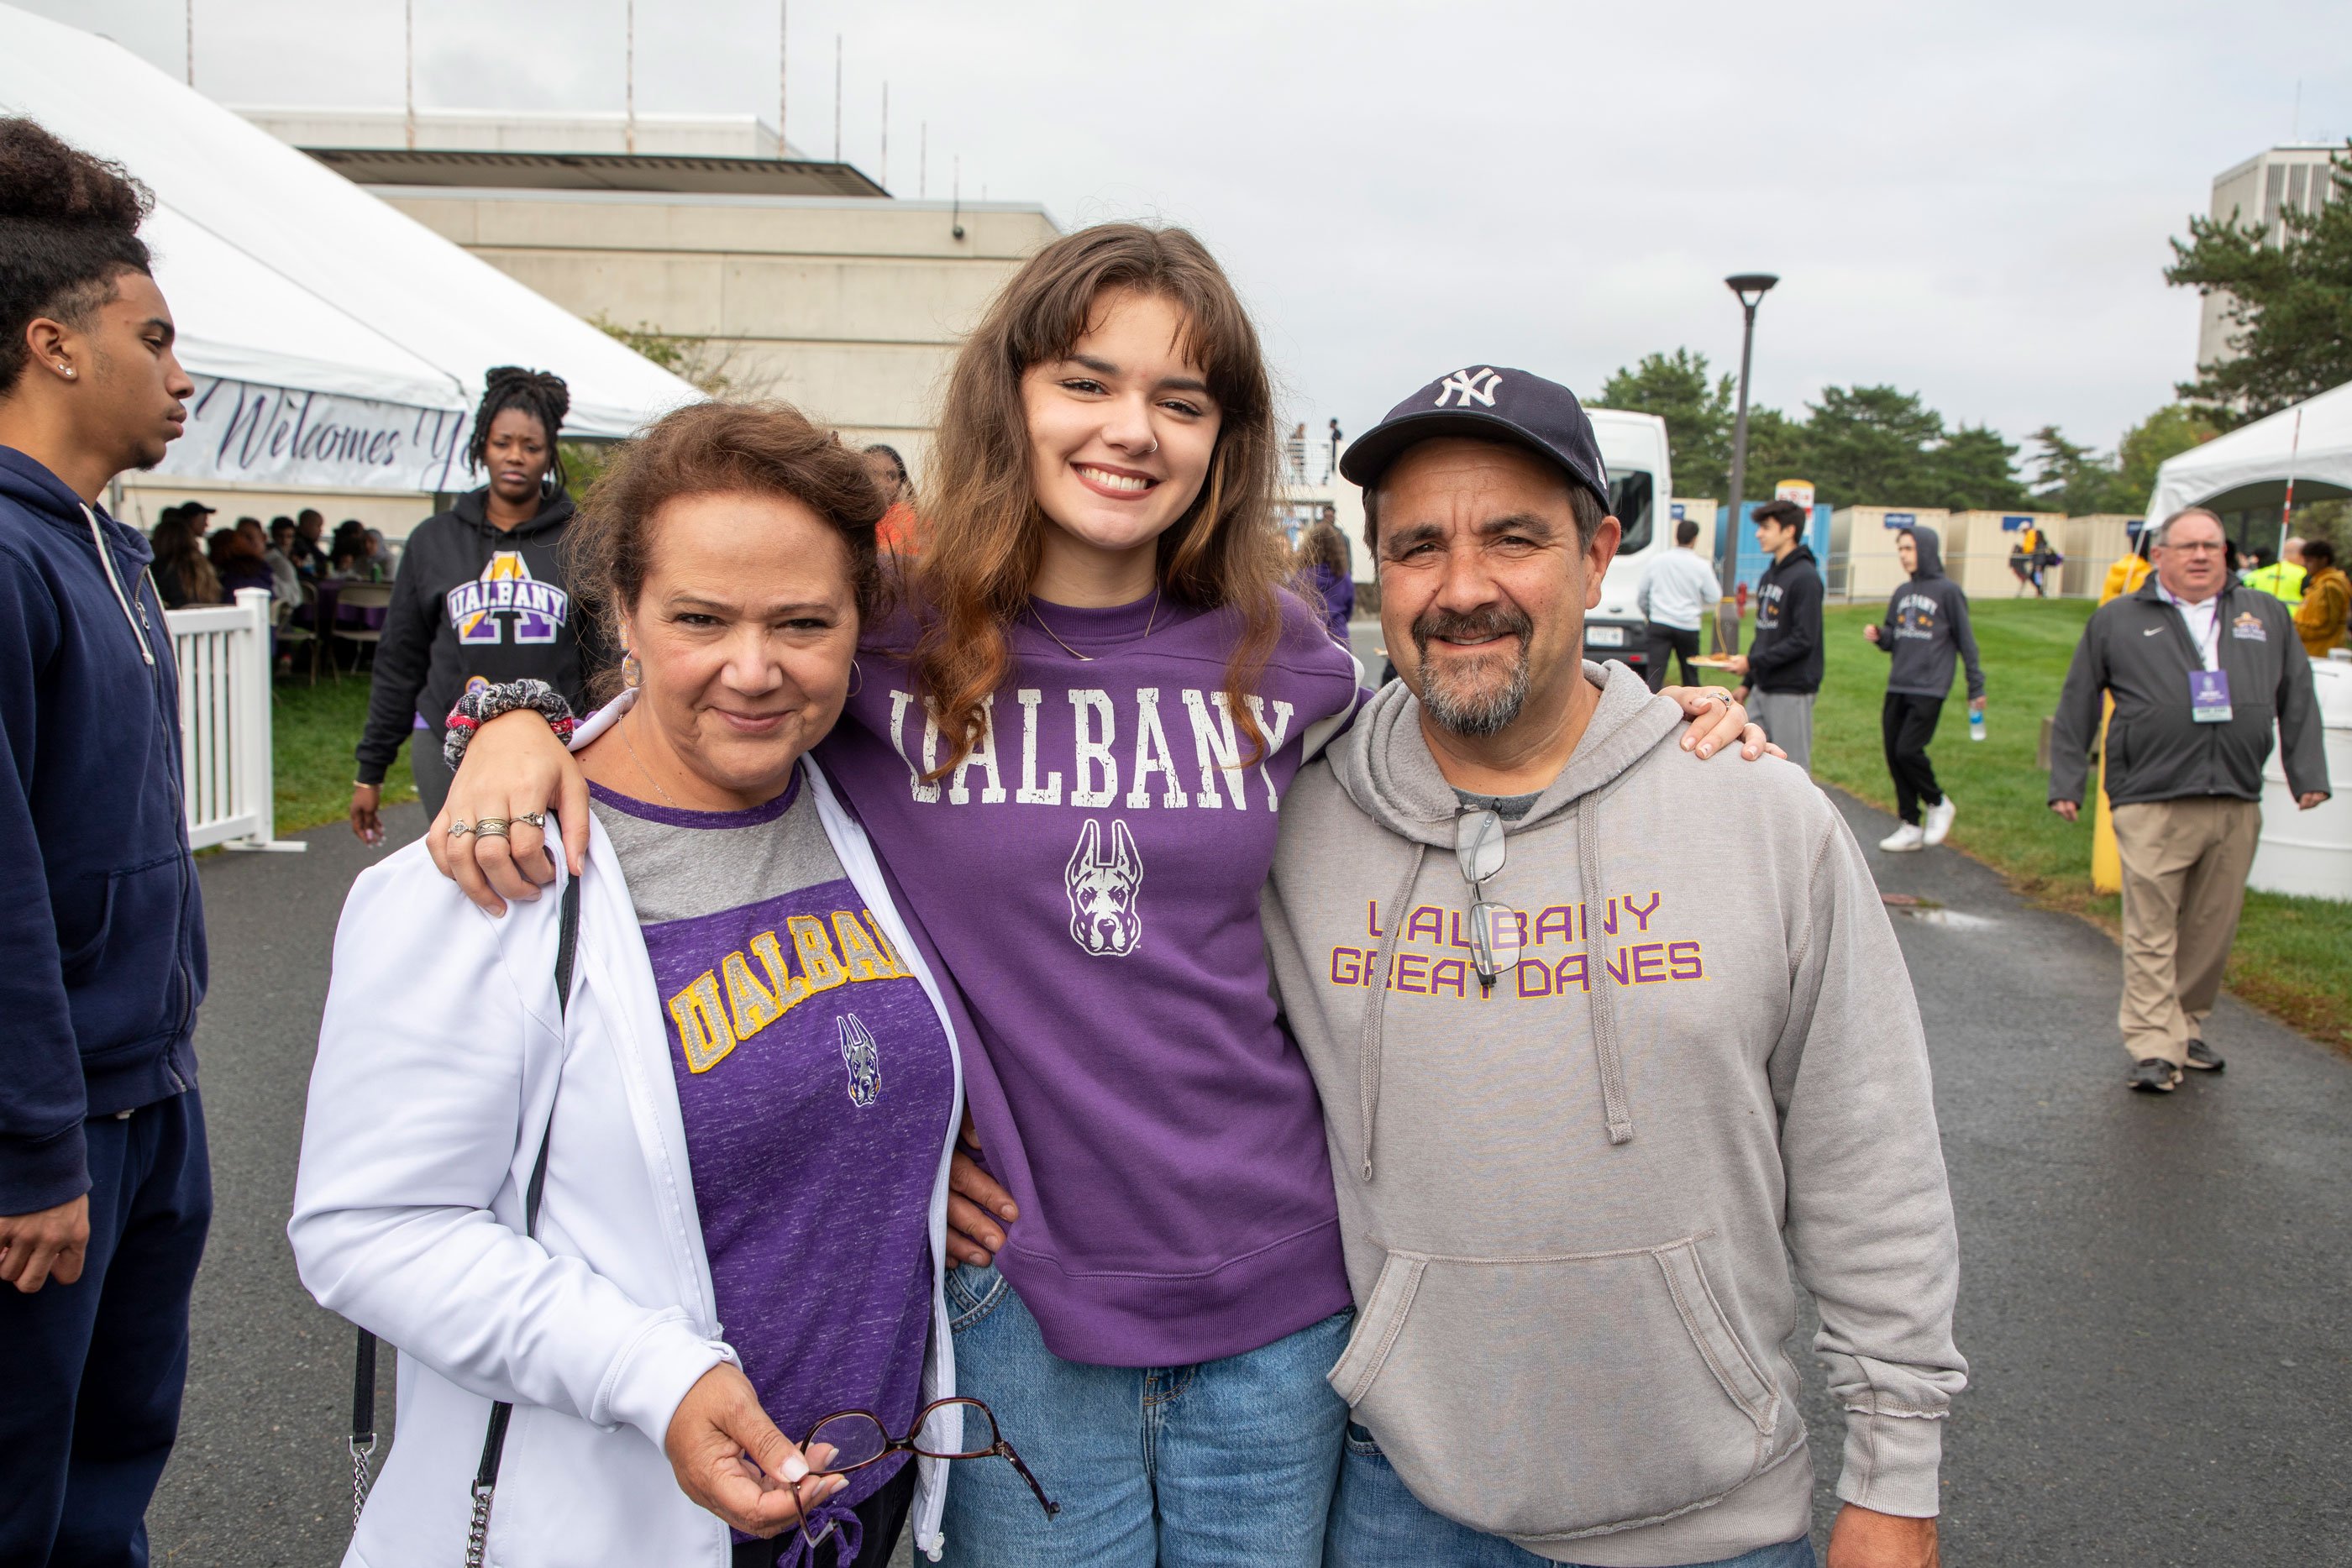 A family of three wearing UAlbany shirts smiles as they pose for a photo.